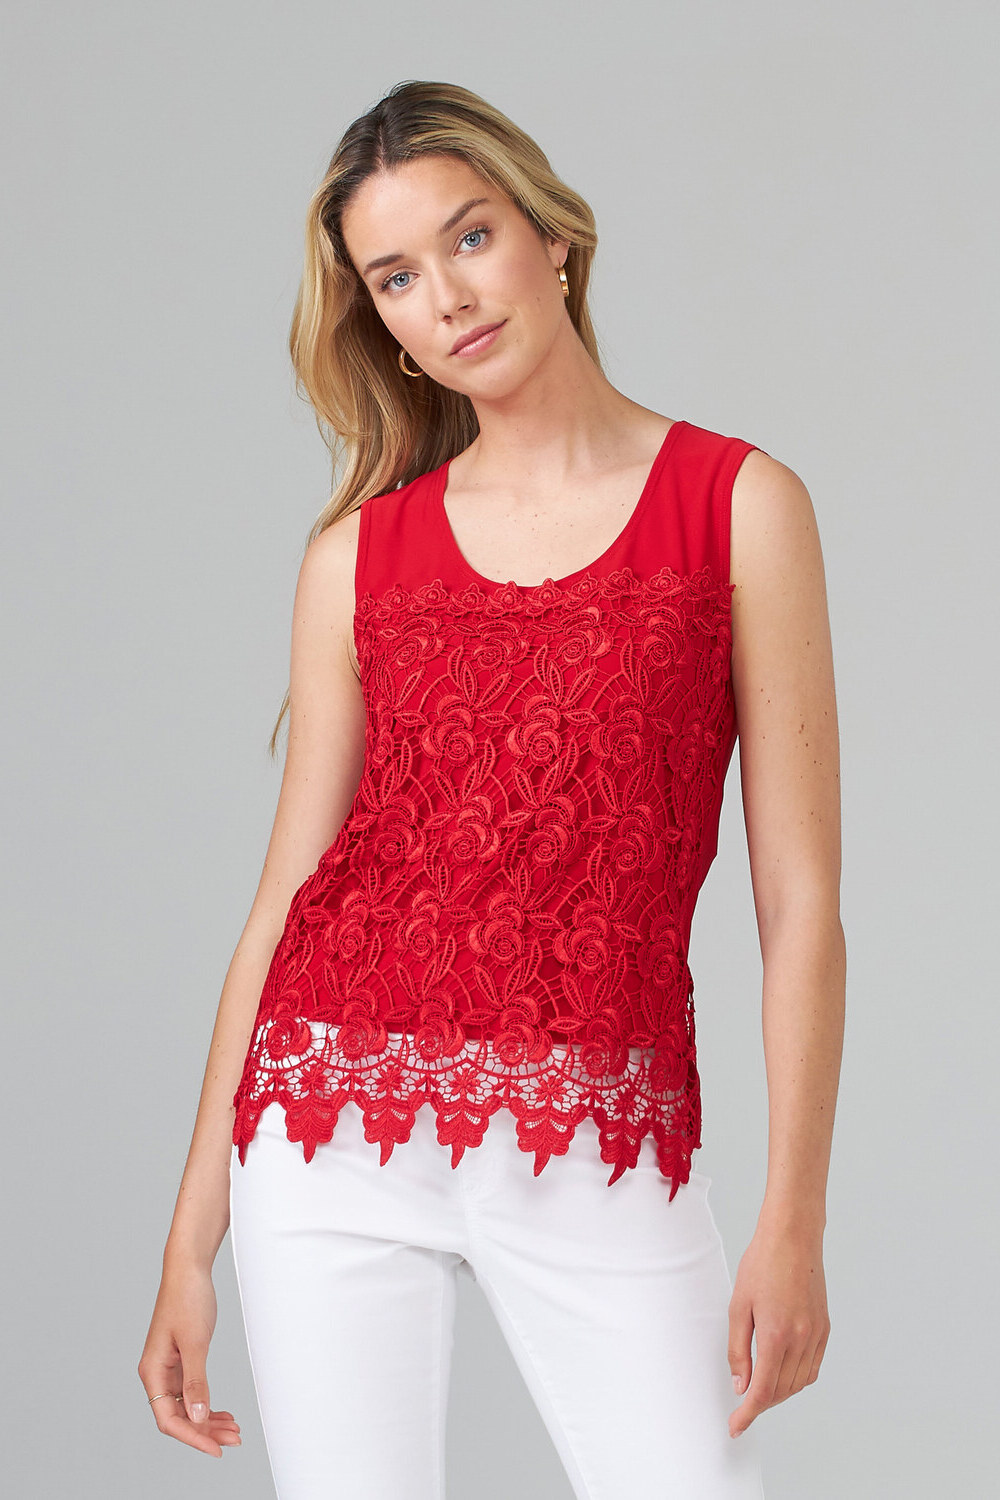 Joseph Ribkoff Camisole style 201237. Rouge A Levres 173